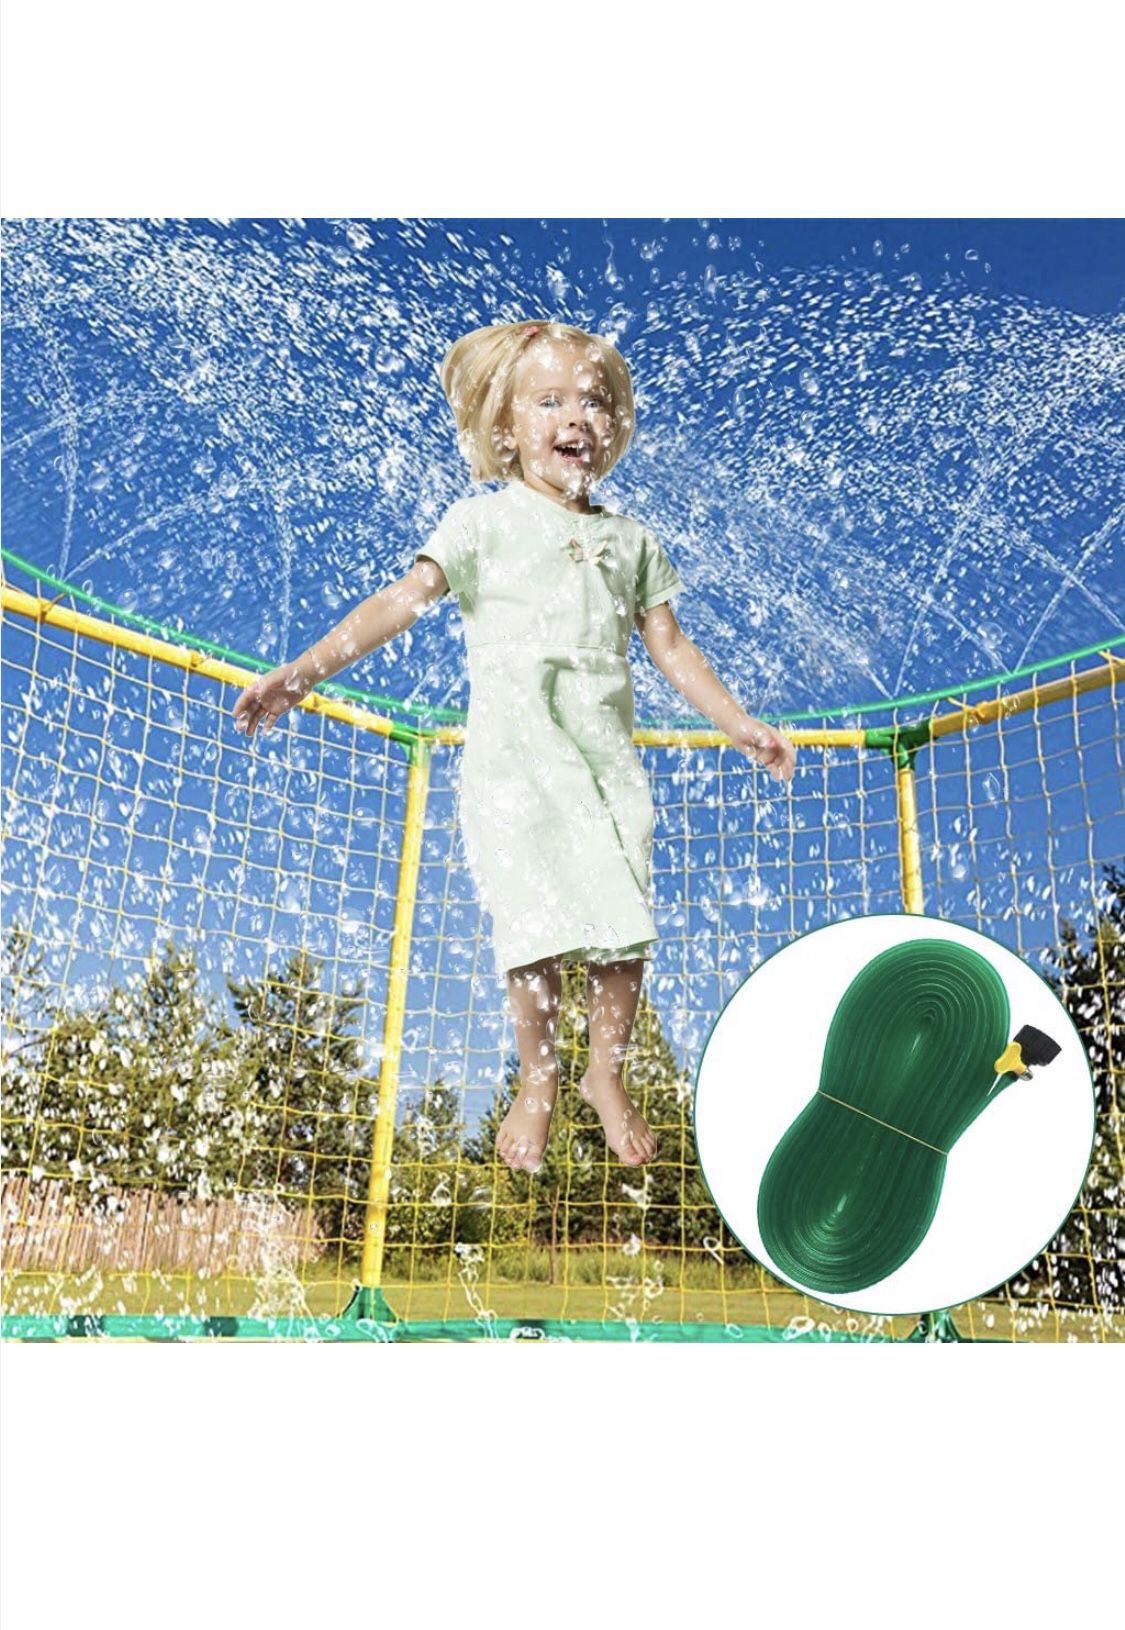 39FT Trampoline Water Sprinkler Summer Outdoor Waterpark Water Party Game Toys for Yards